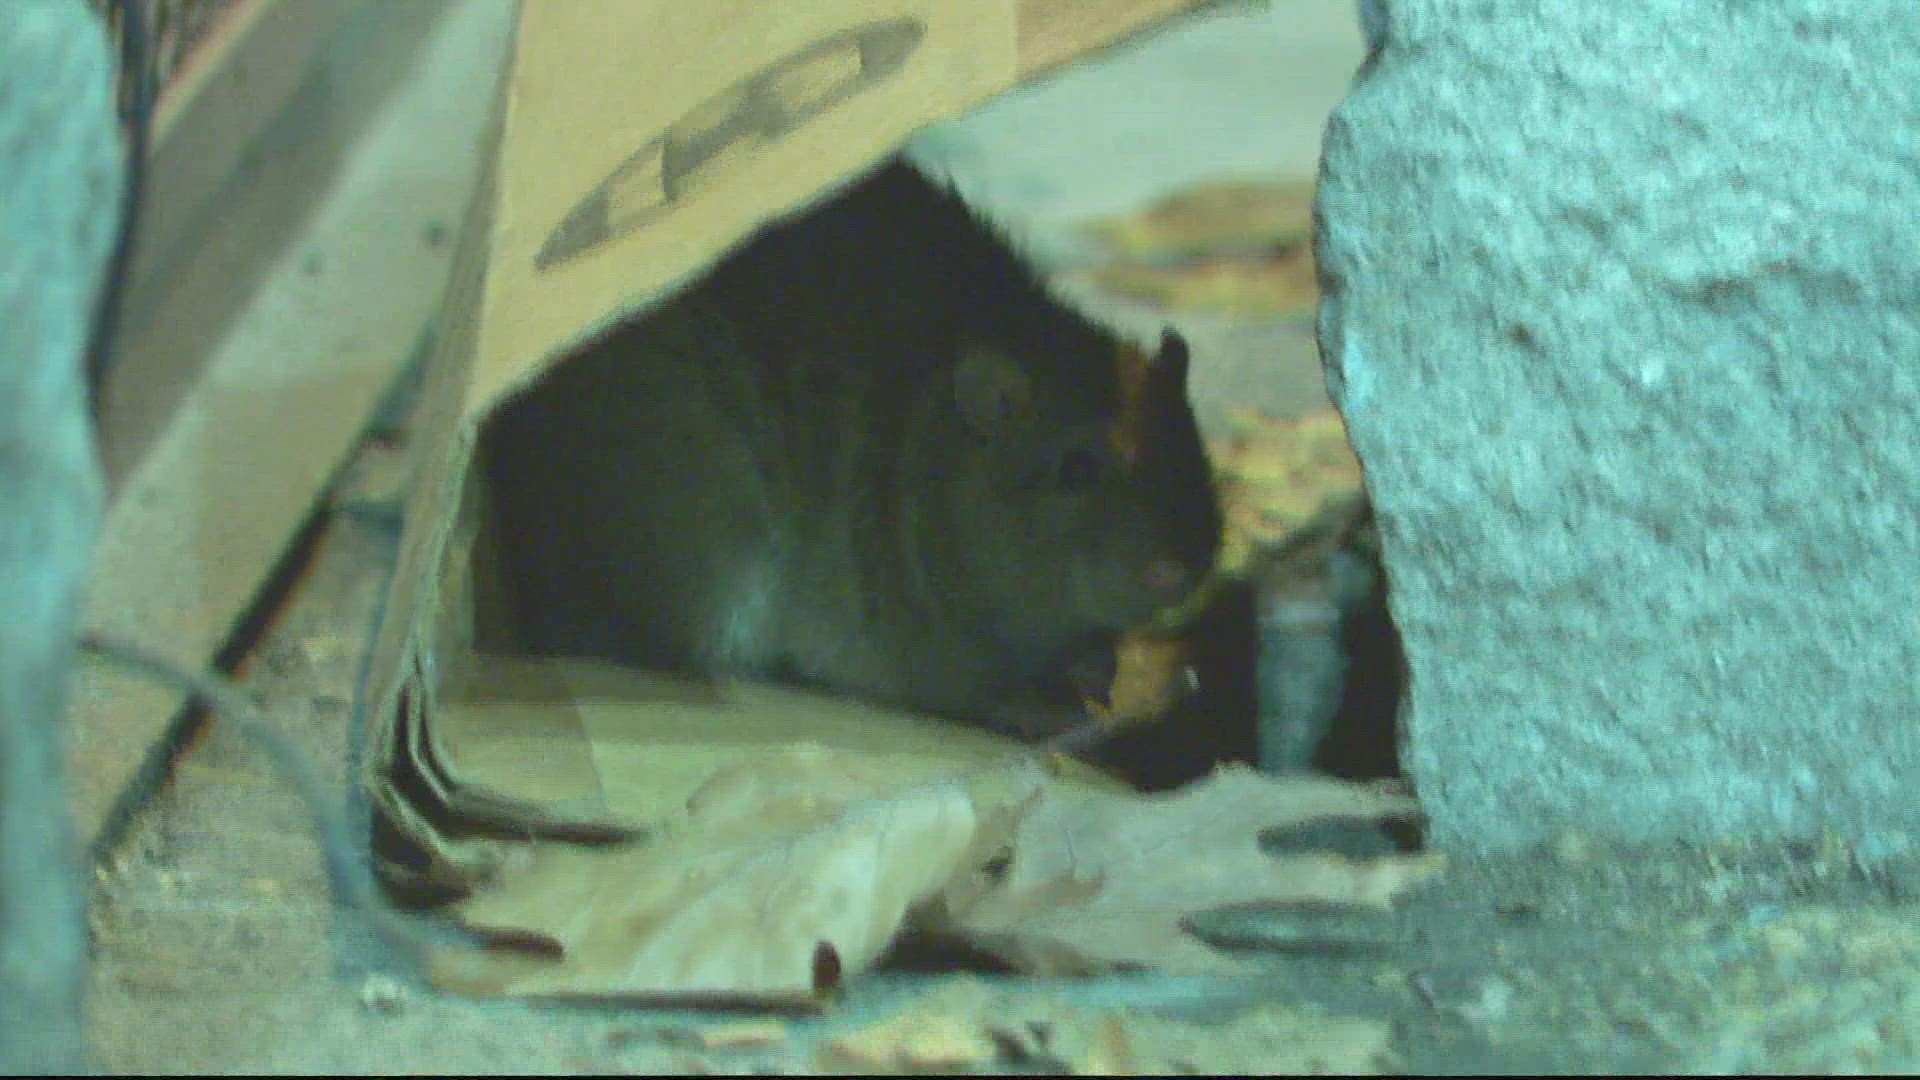 A known problem for years, residents say the rat problems have gotten worse since the pandemic.